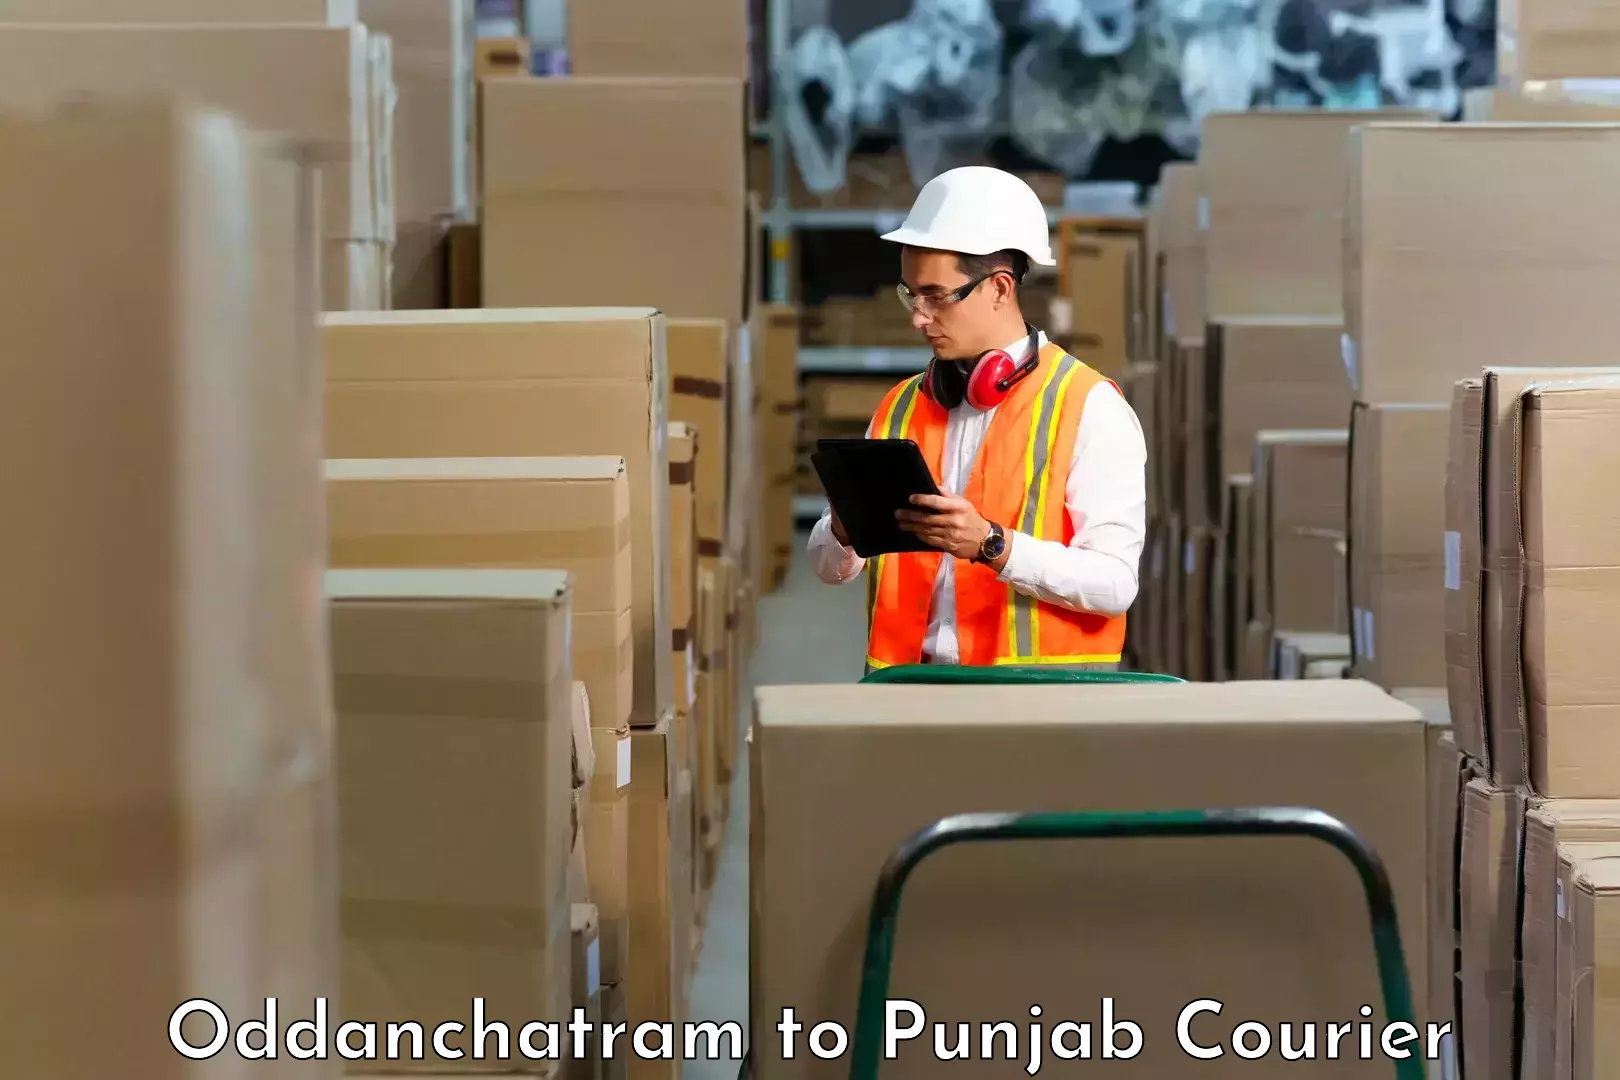 Courier service booking Oddanchatram to Firozpur